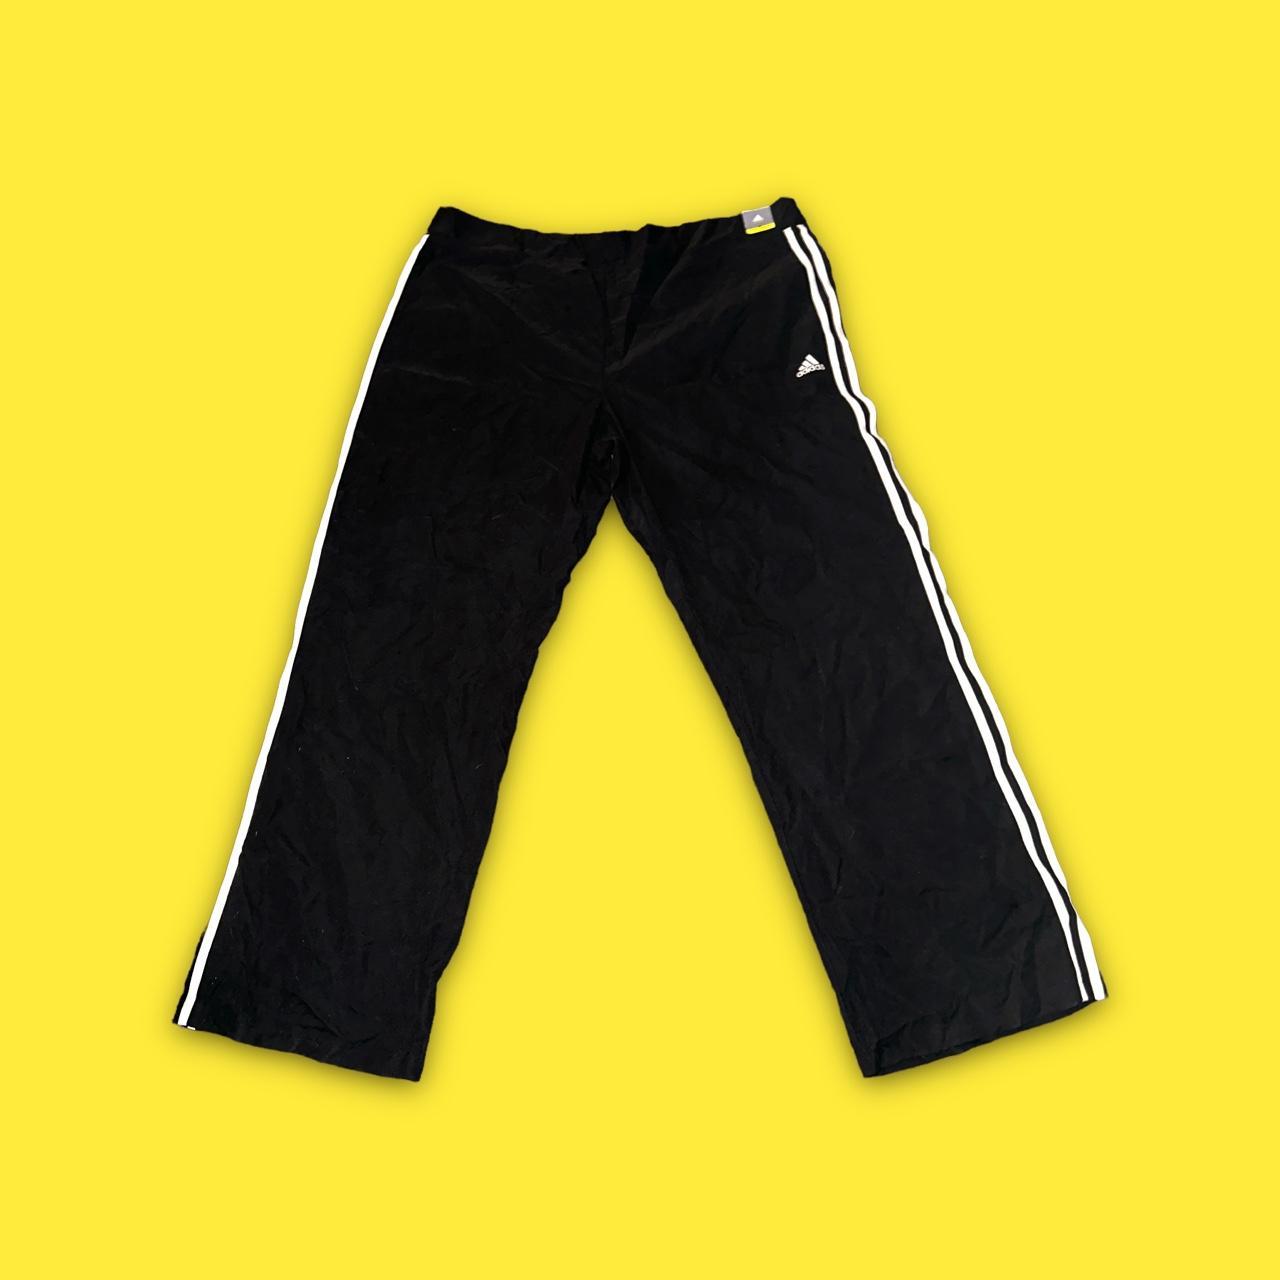 Adidas Men's Black and White Joggers-tracksuits (2)